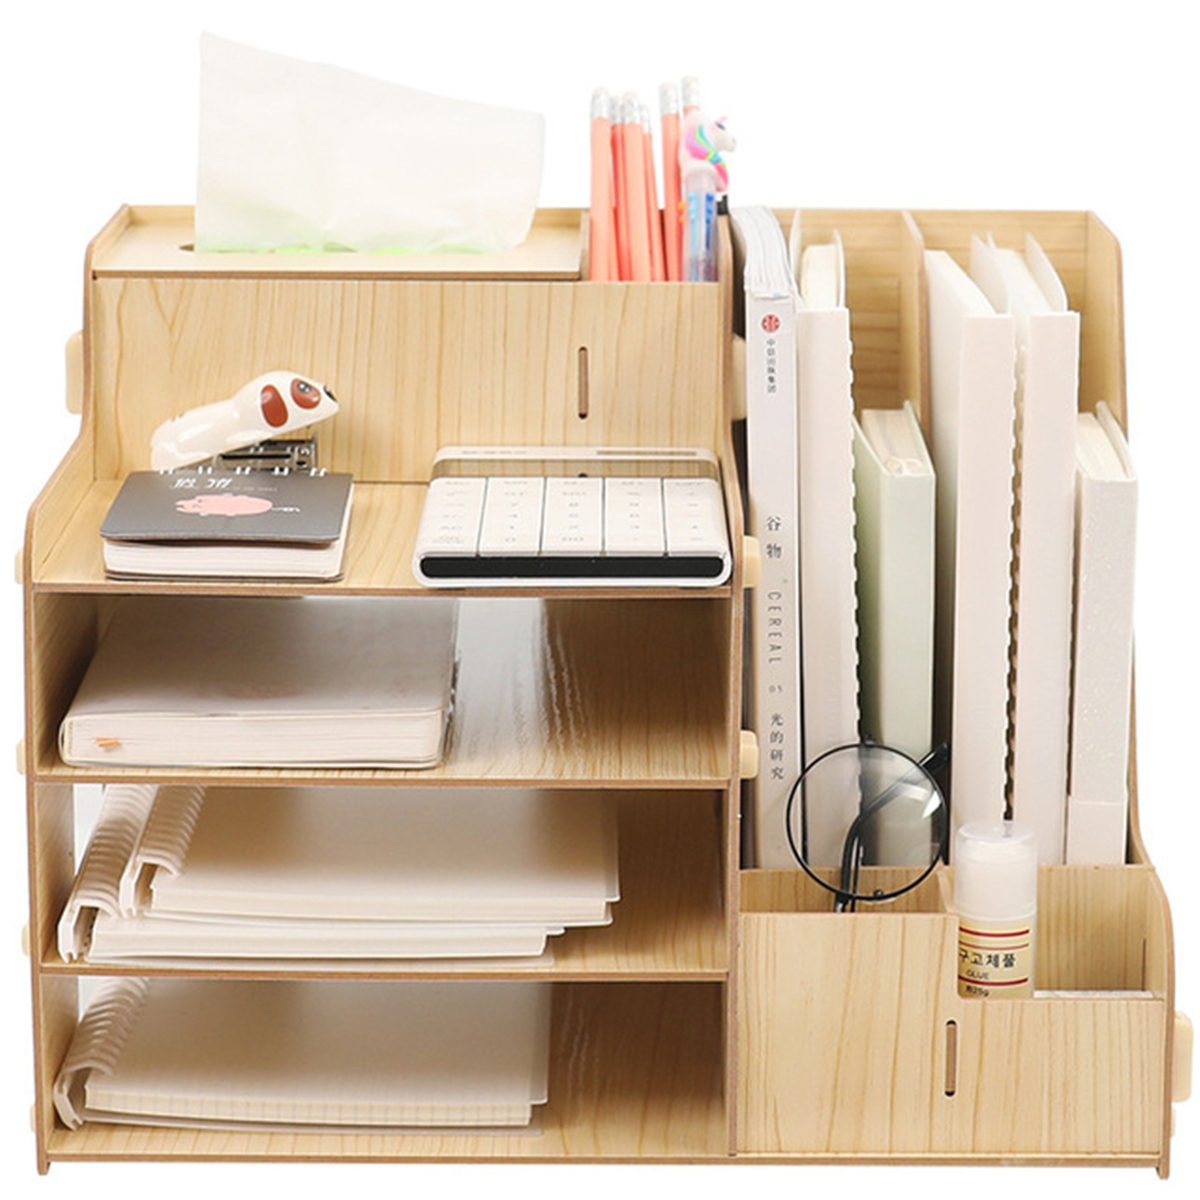 Stationery-Container-Desktop-Drawer-Organizer-Desktop-Storage-Box-Brush-Container-Office-Pencil-Hold-1603946-1